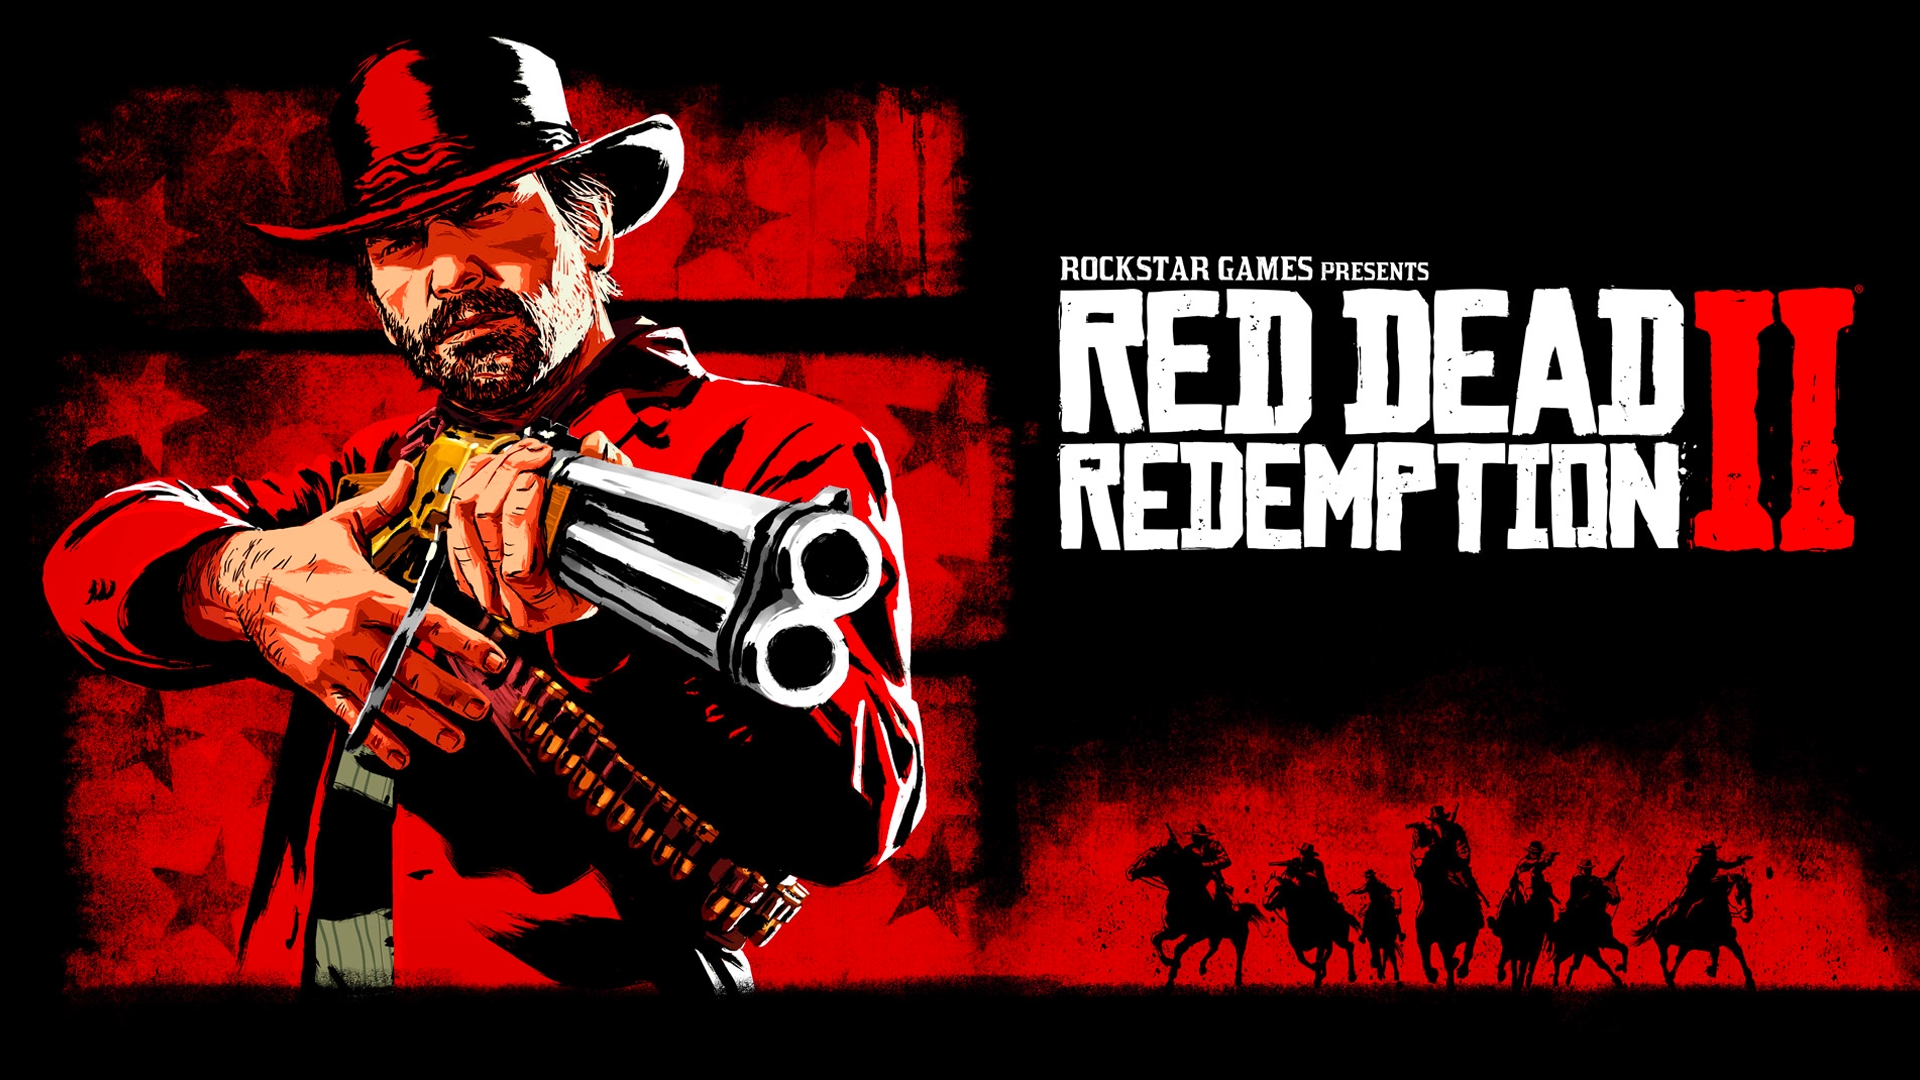 https://gaming-cdn.com/images/products/5679/orig/red-dead-redemption-2-pc-juego-rockstar-cover.jpg?v=1701275002